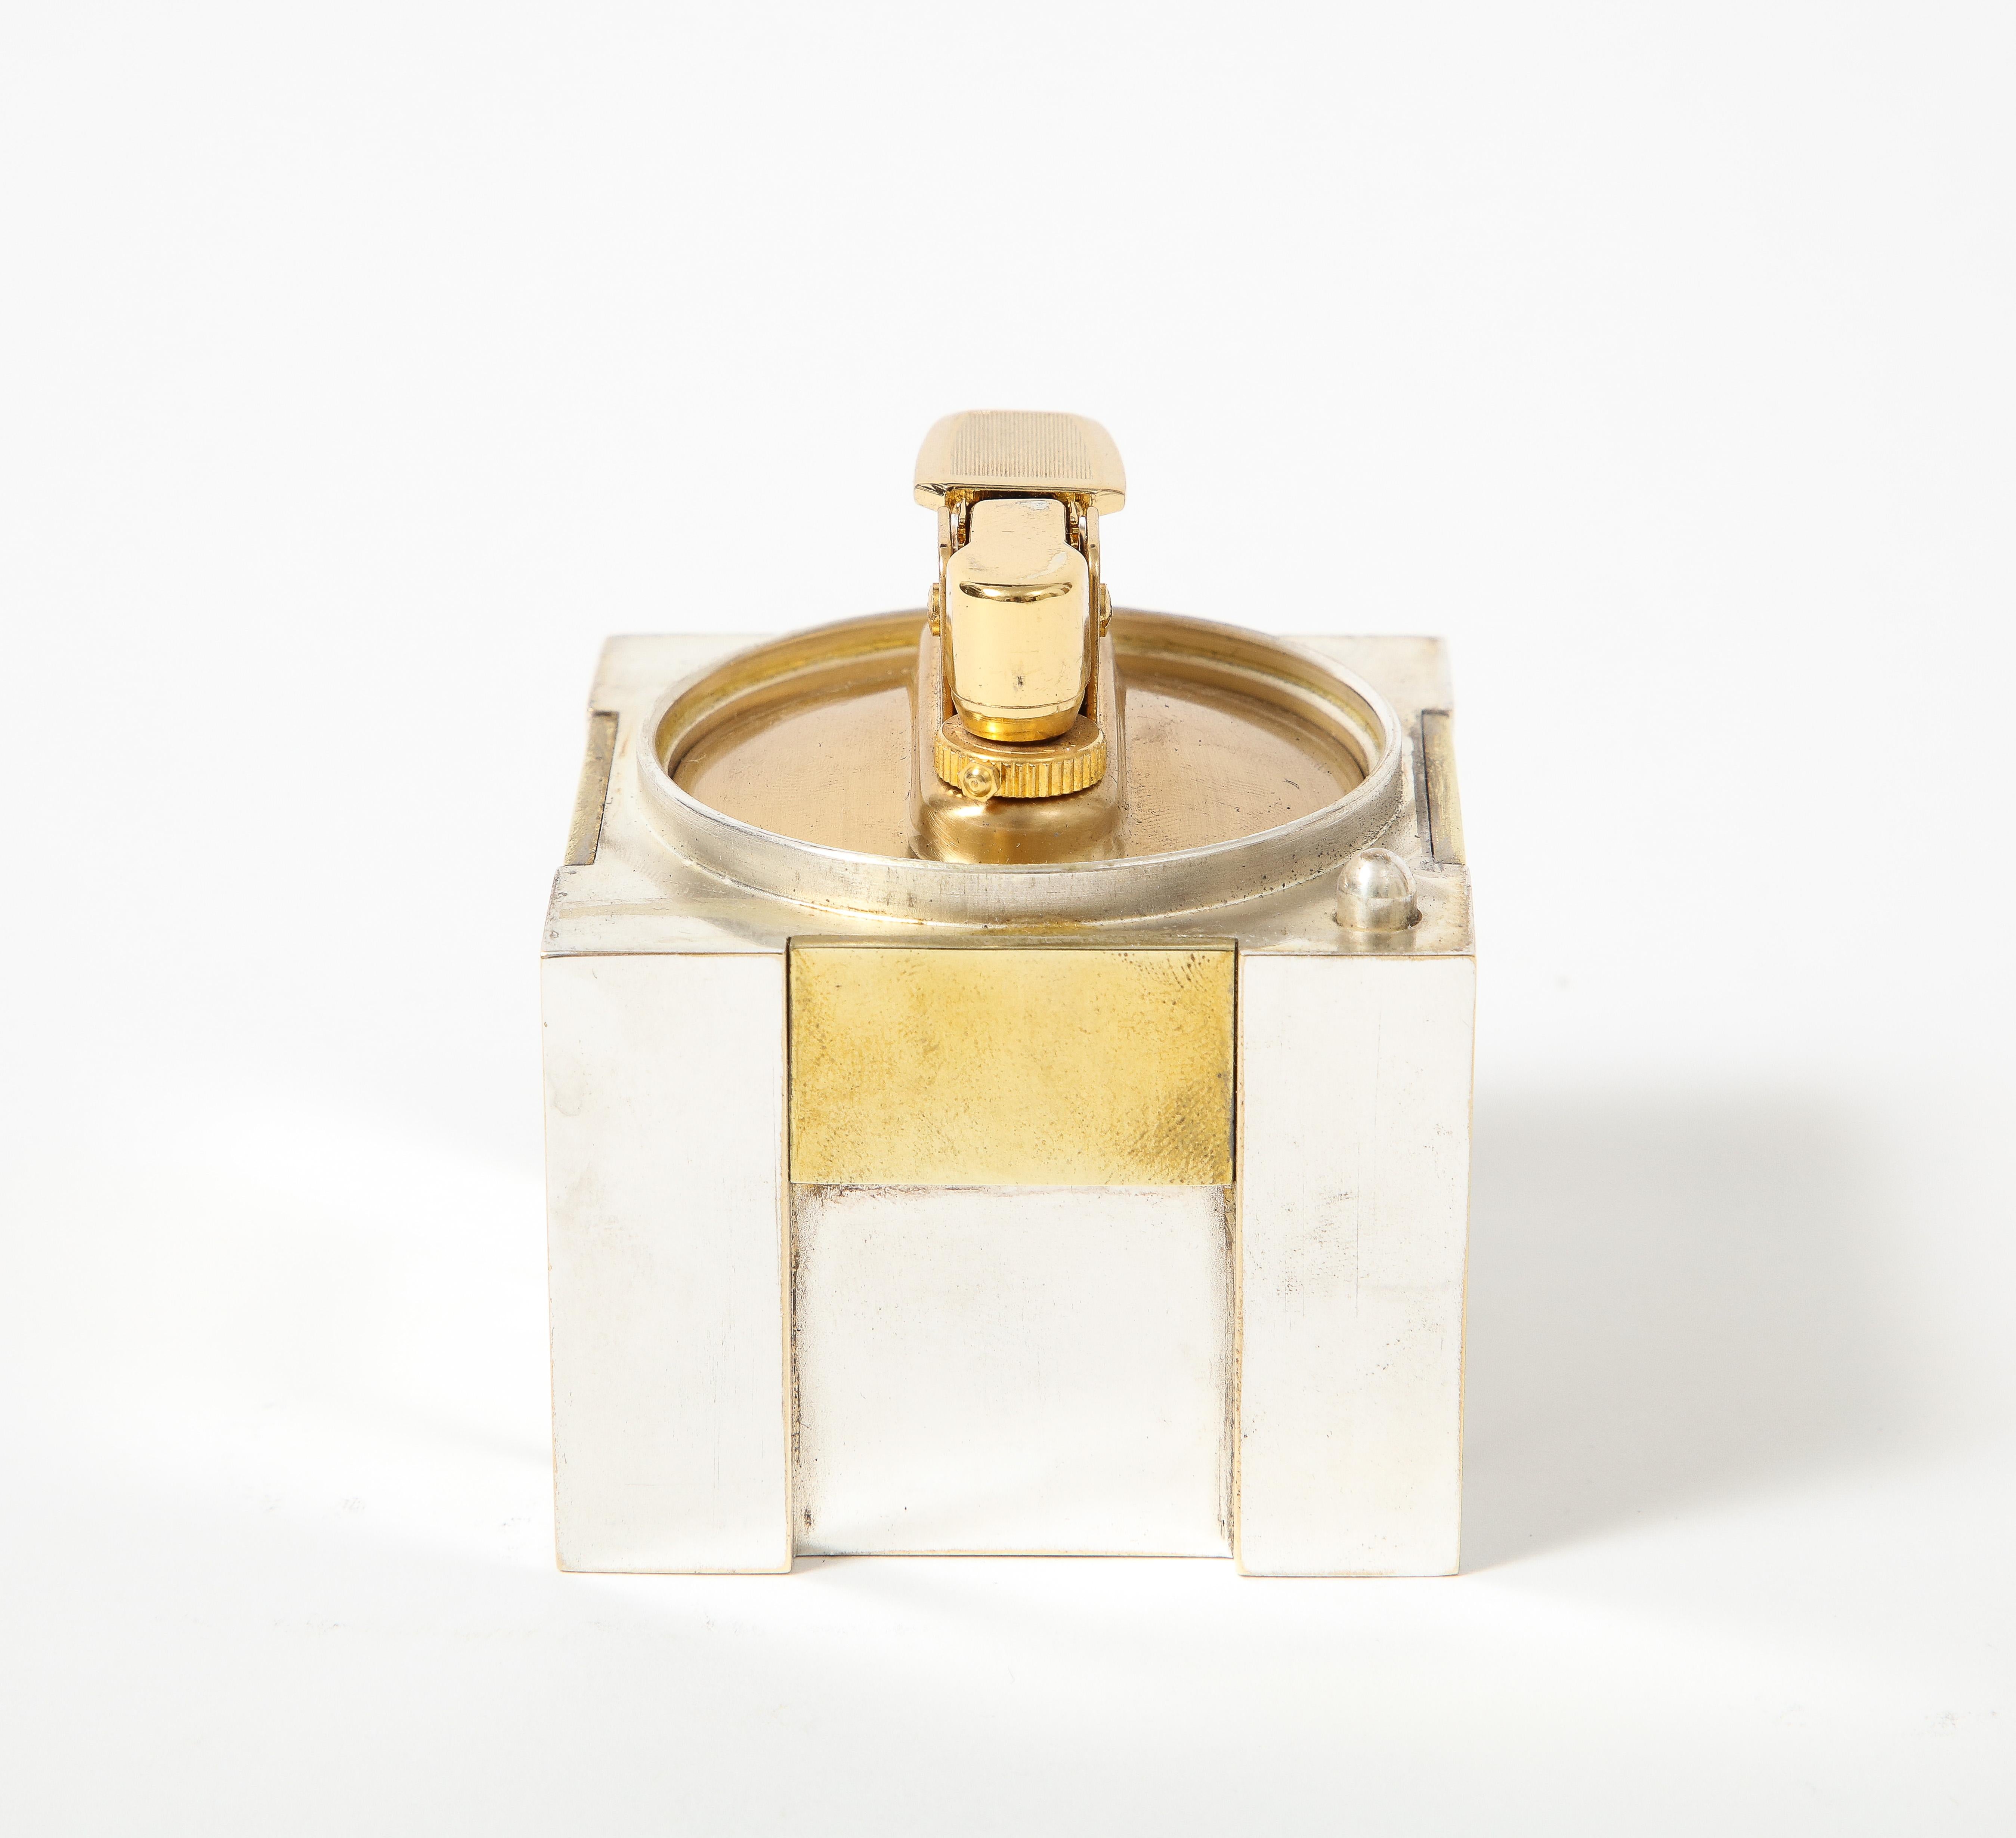 Silver and Brass Lighter, Hermes, Italy, c. 1970 For Sale 4